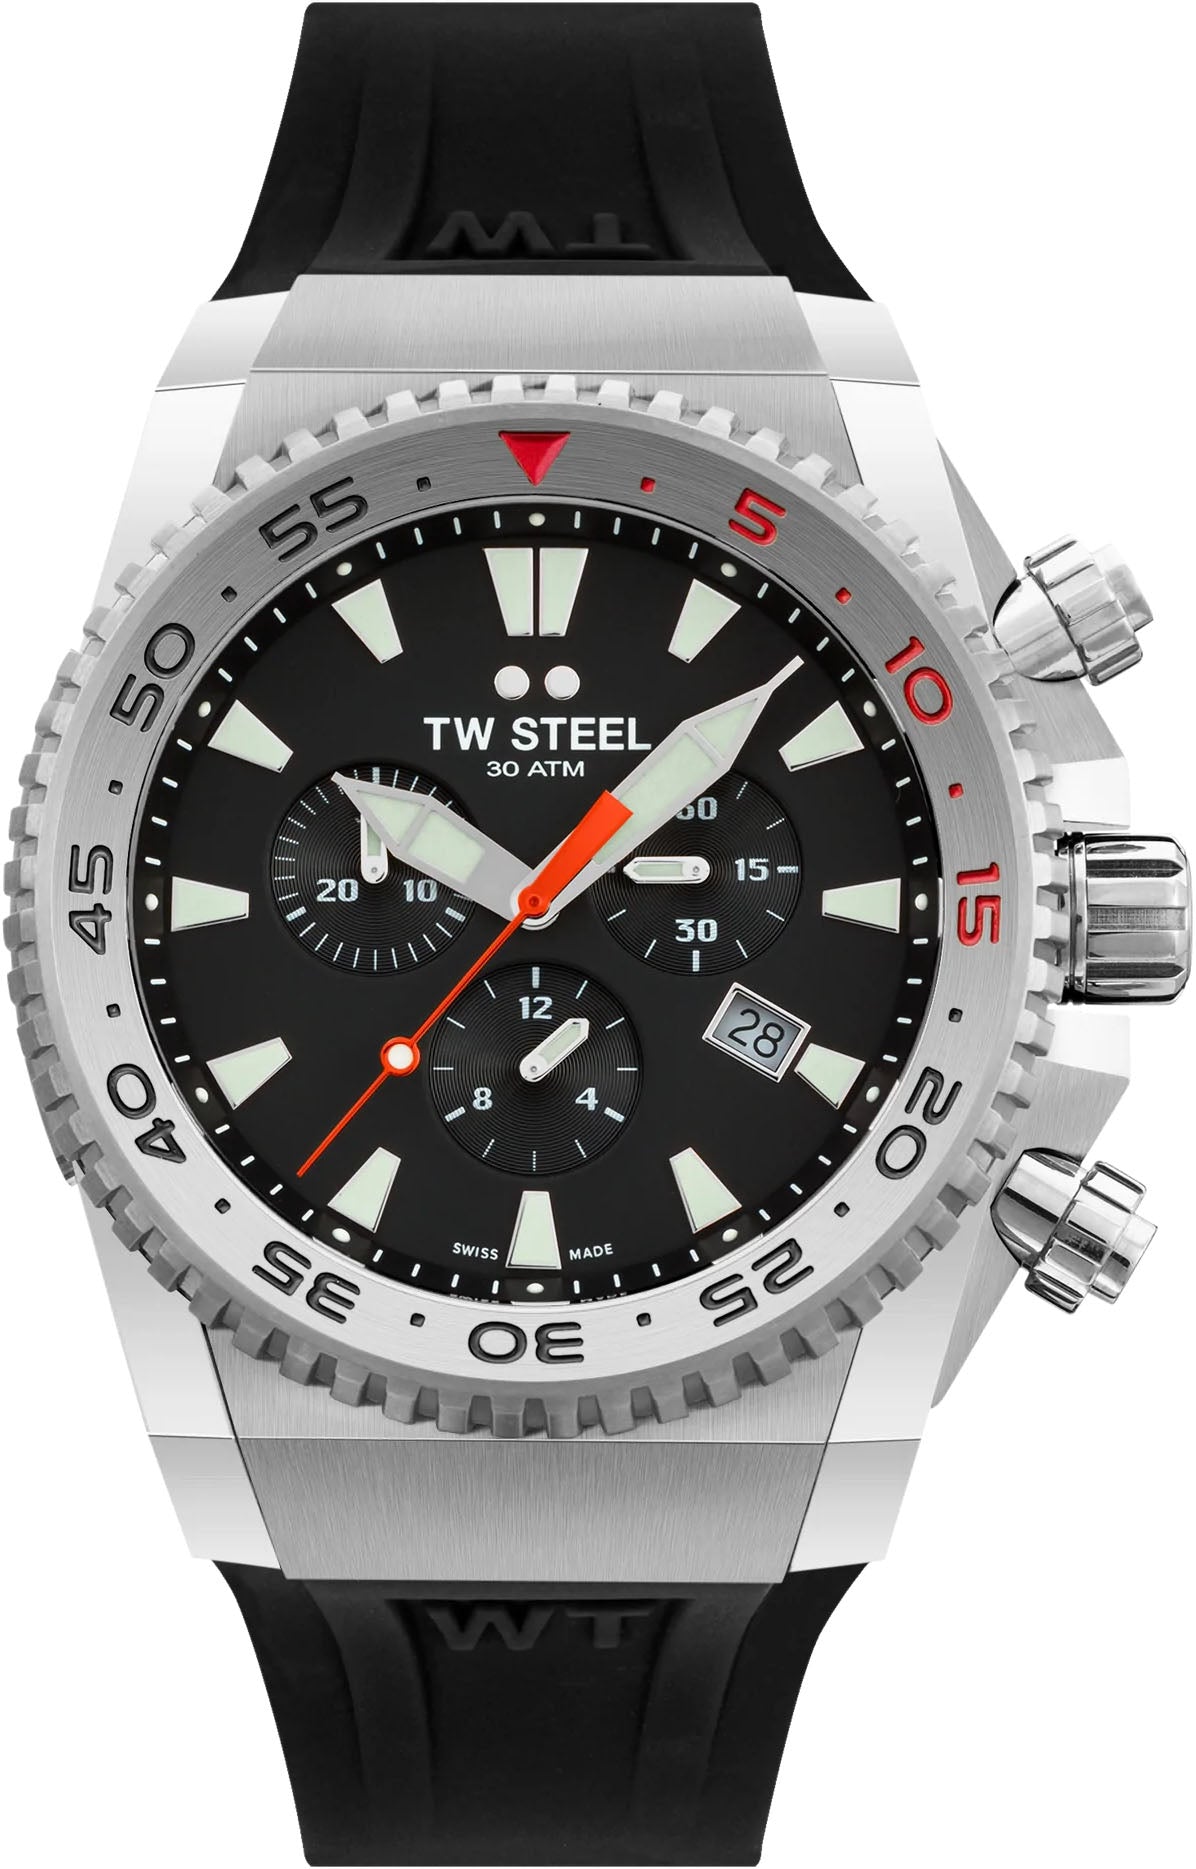 Photos - Wrist Watch TW Steel Watch ACE Diver Limited Edition - Black TW-658 